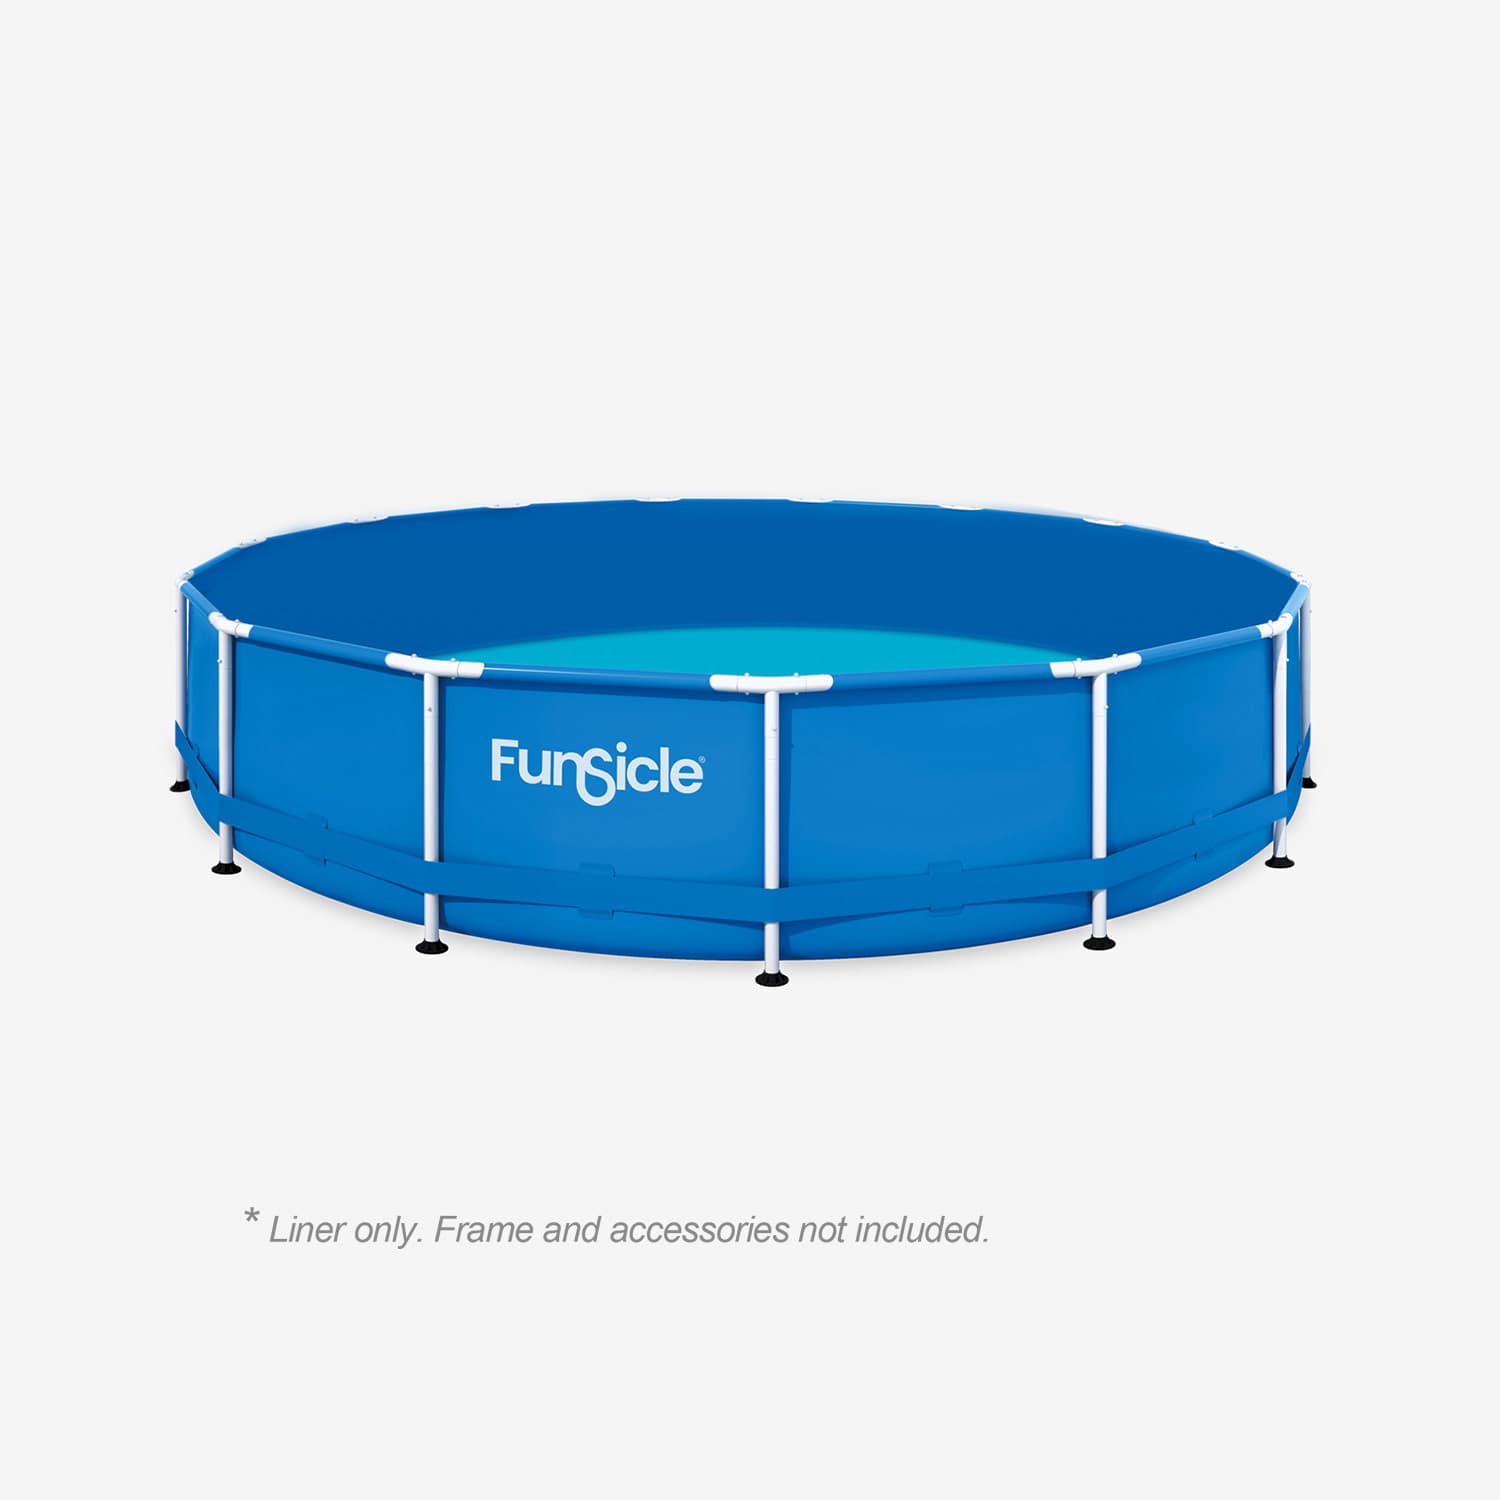  Funsicle 14 ft Activity Pool Liner Blue